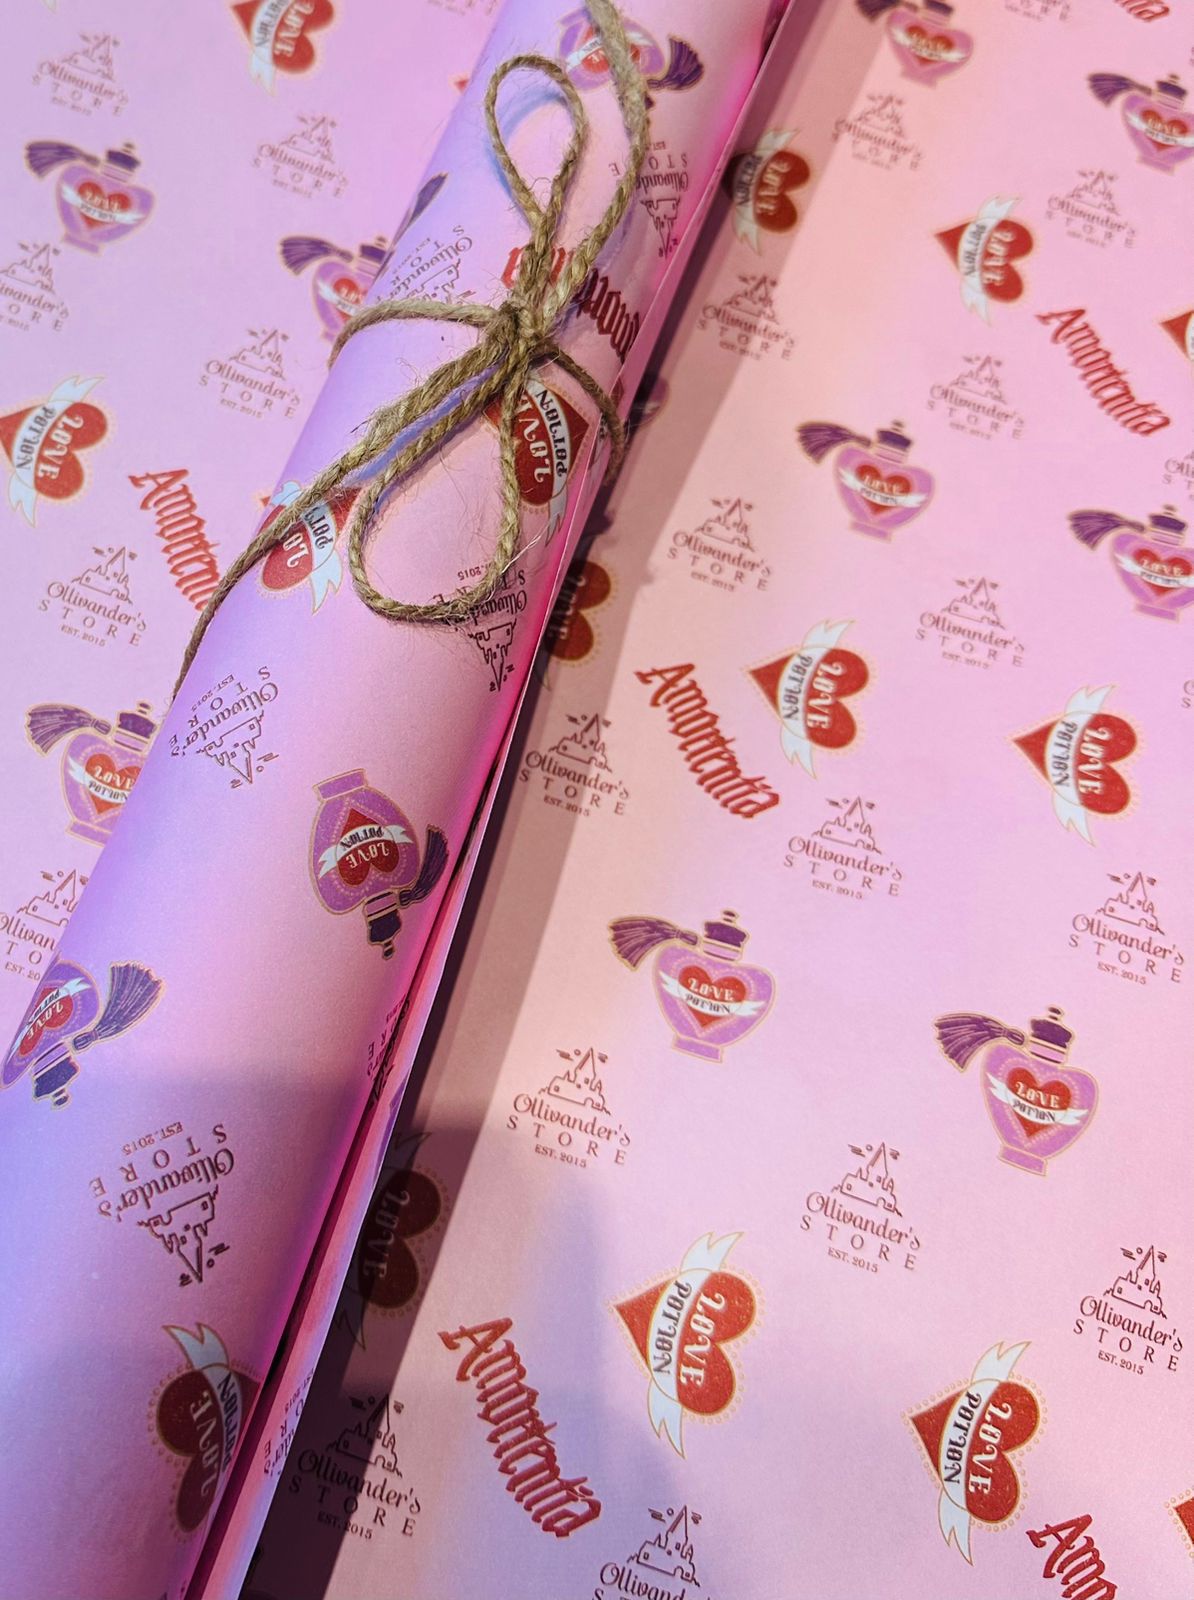 Amortentia wrapping paper